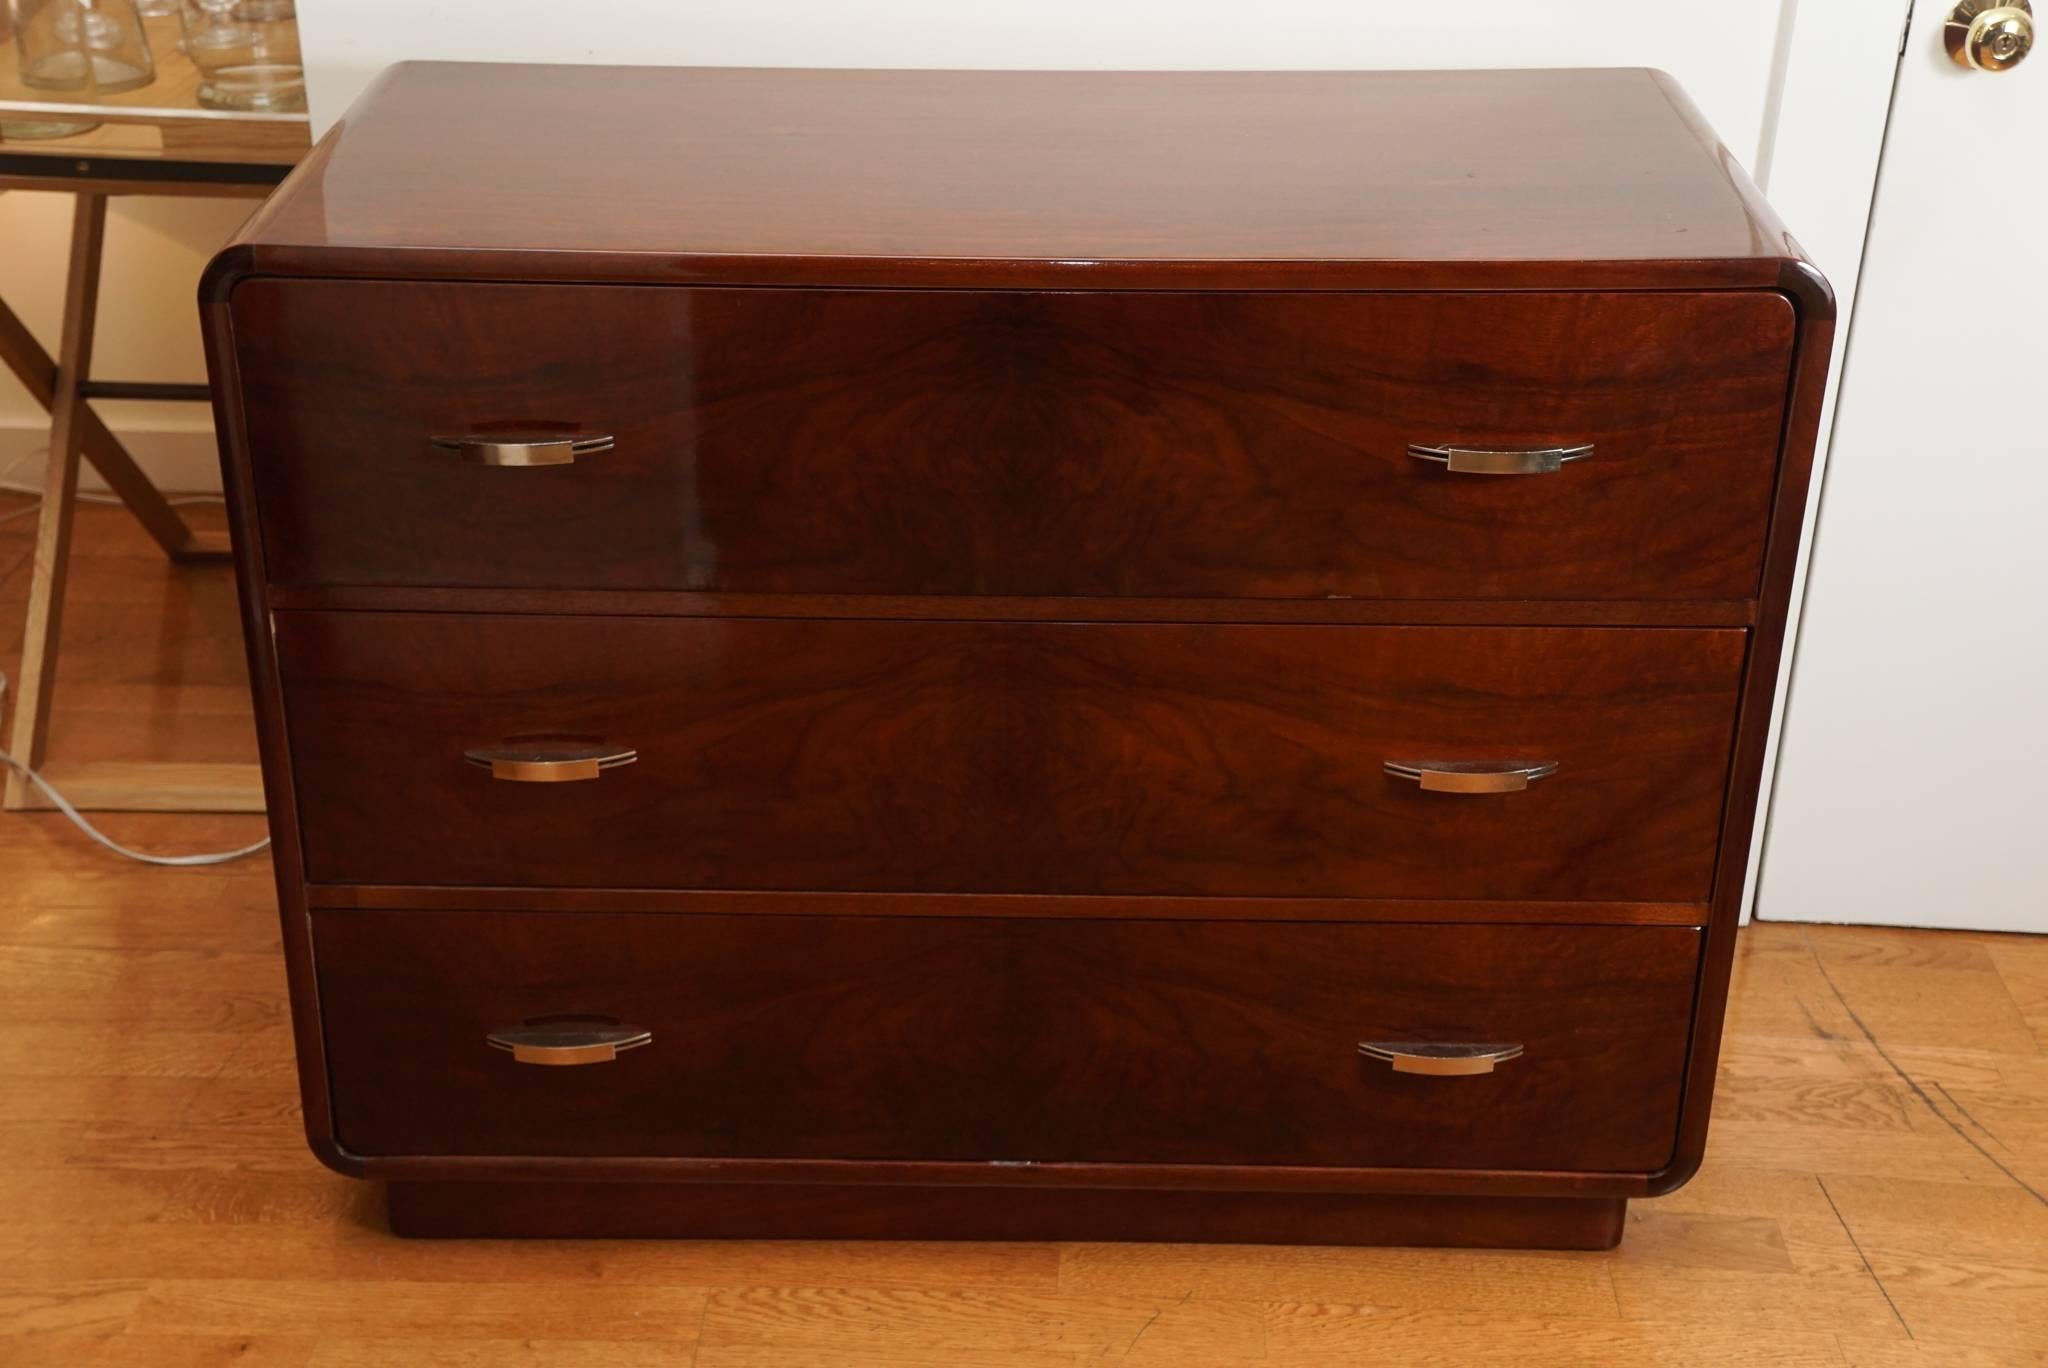 Amazing, Art Deco, two sided chest of drawers, in a glossy mahogany, with elegant design elements that characterized the age. Including rounded corners and brass hardware. A very special piece!